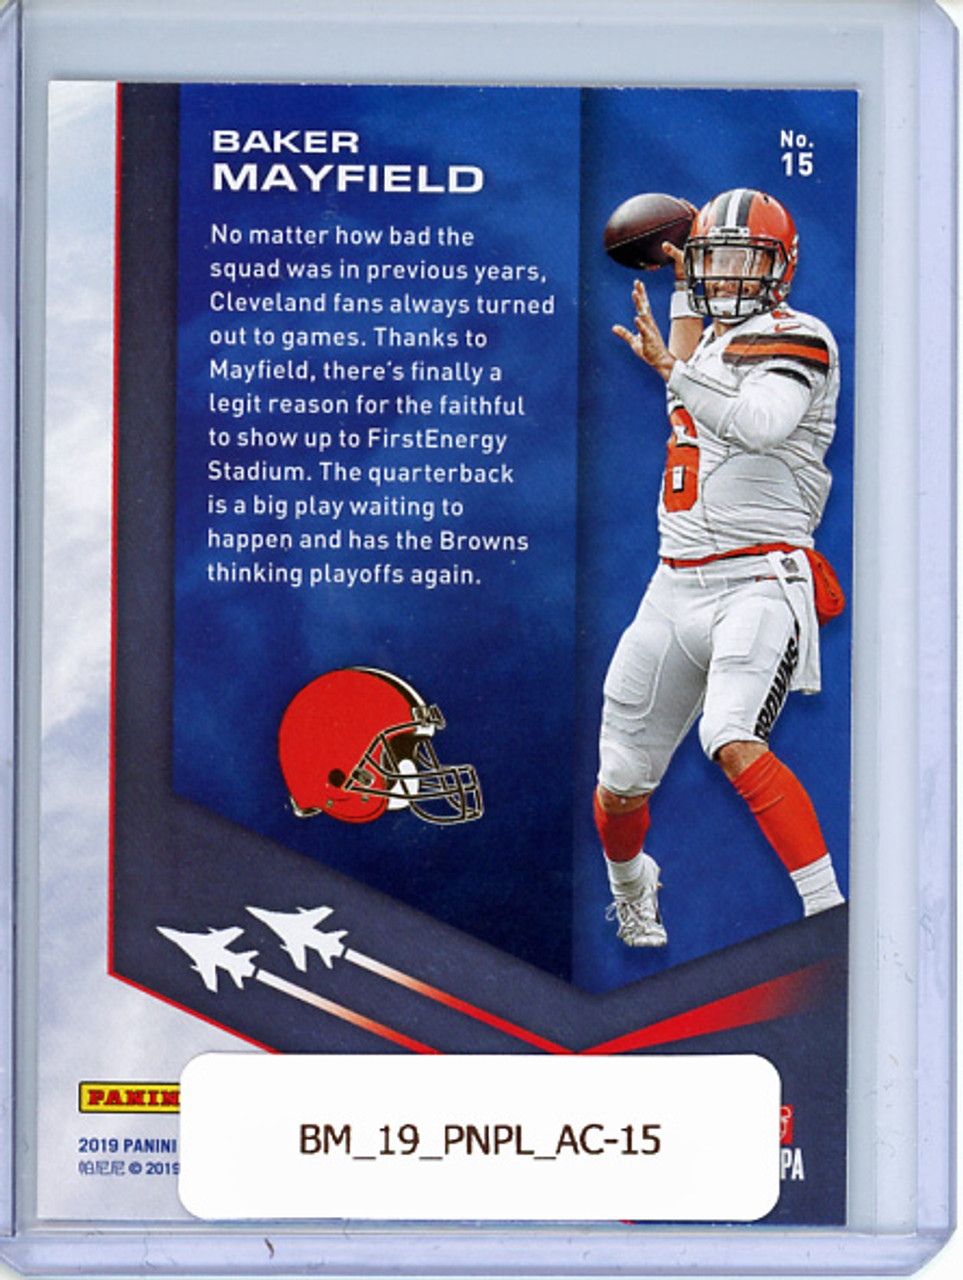 Baker Mayfield 2019 Playoff, Air Command #15